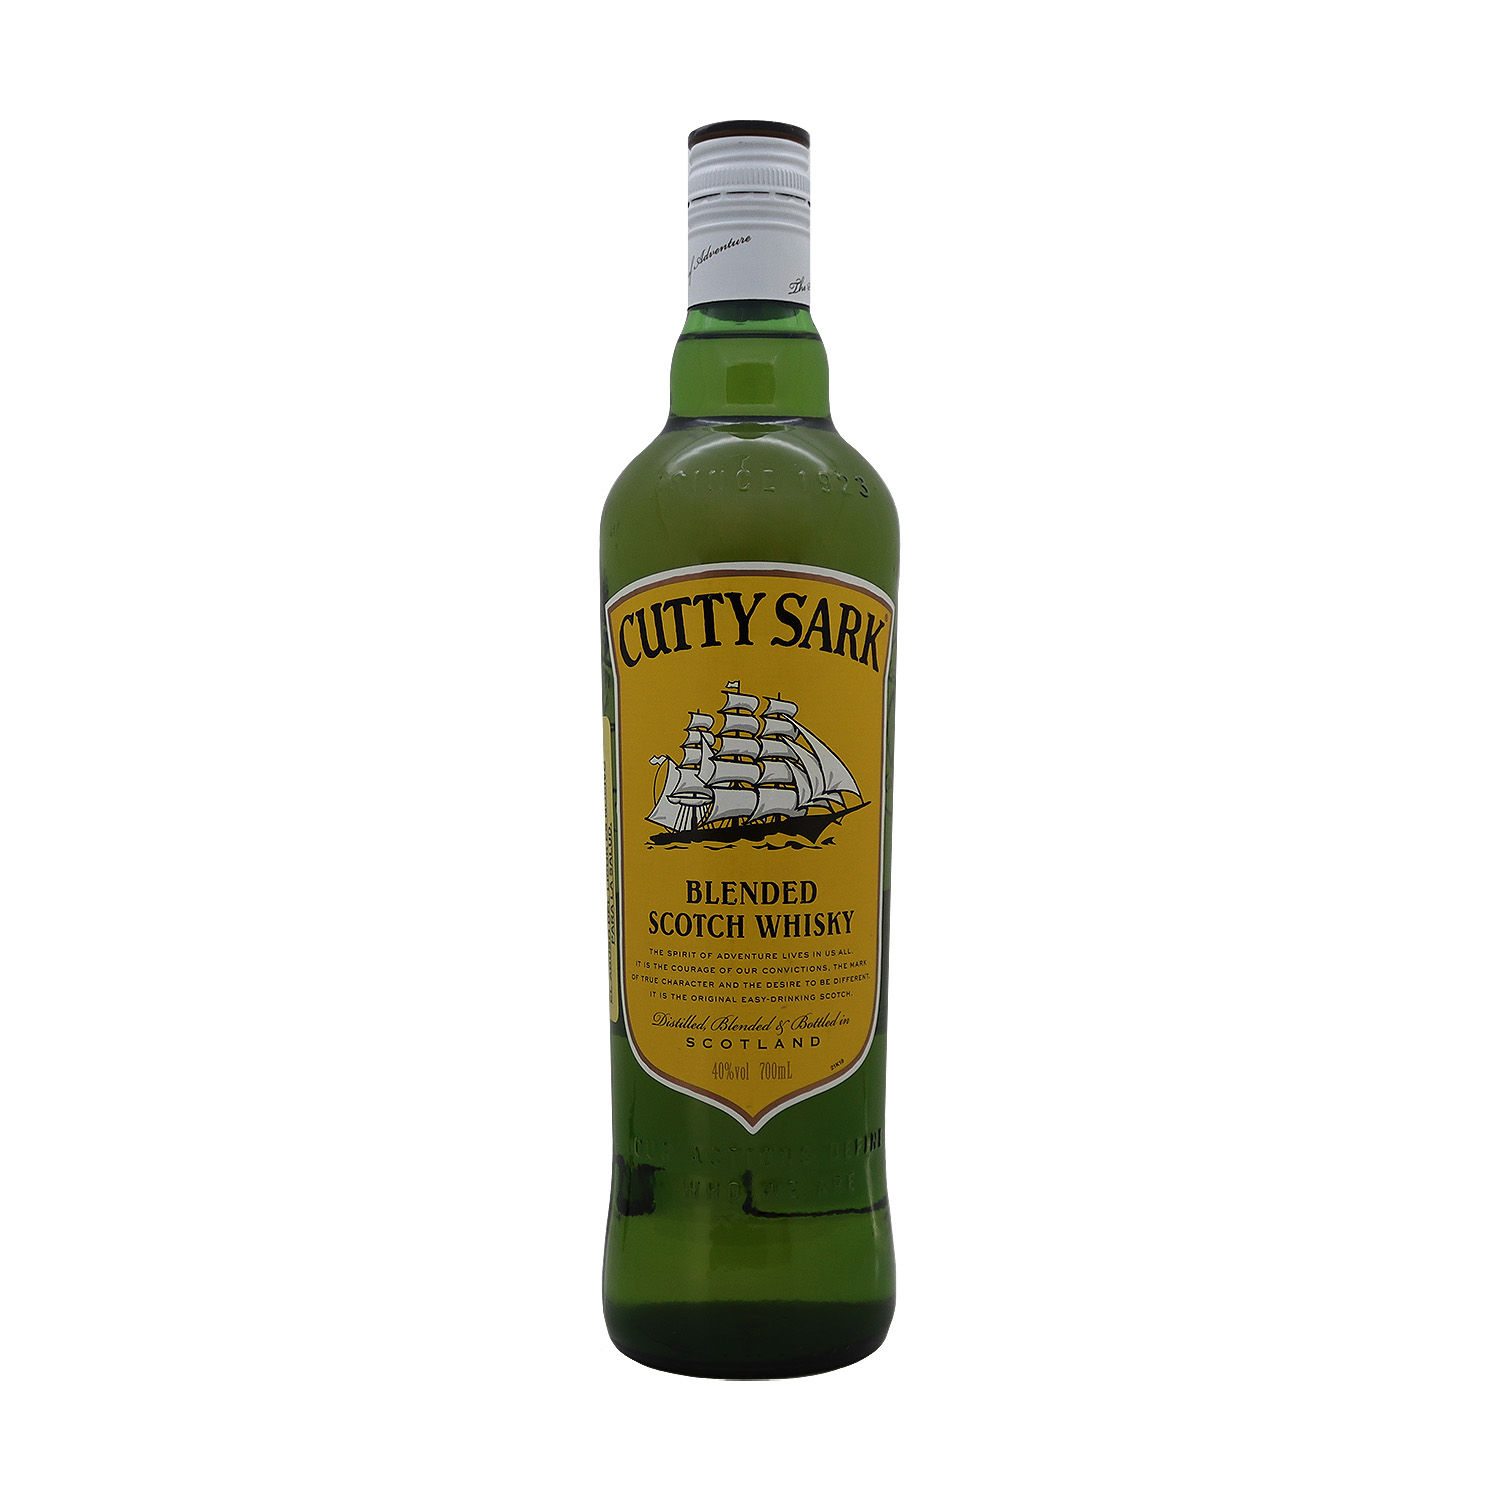 Whisky Escoces Blend Cutty Sark Botella 700ml